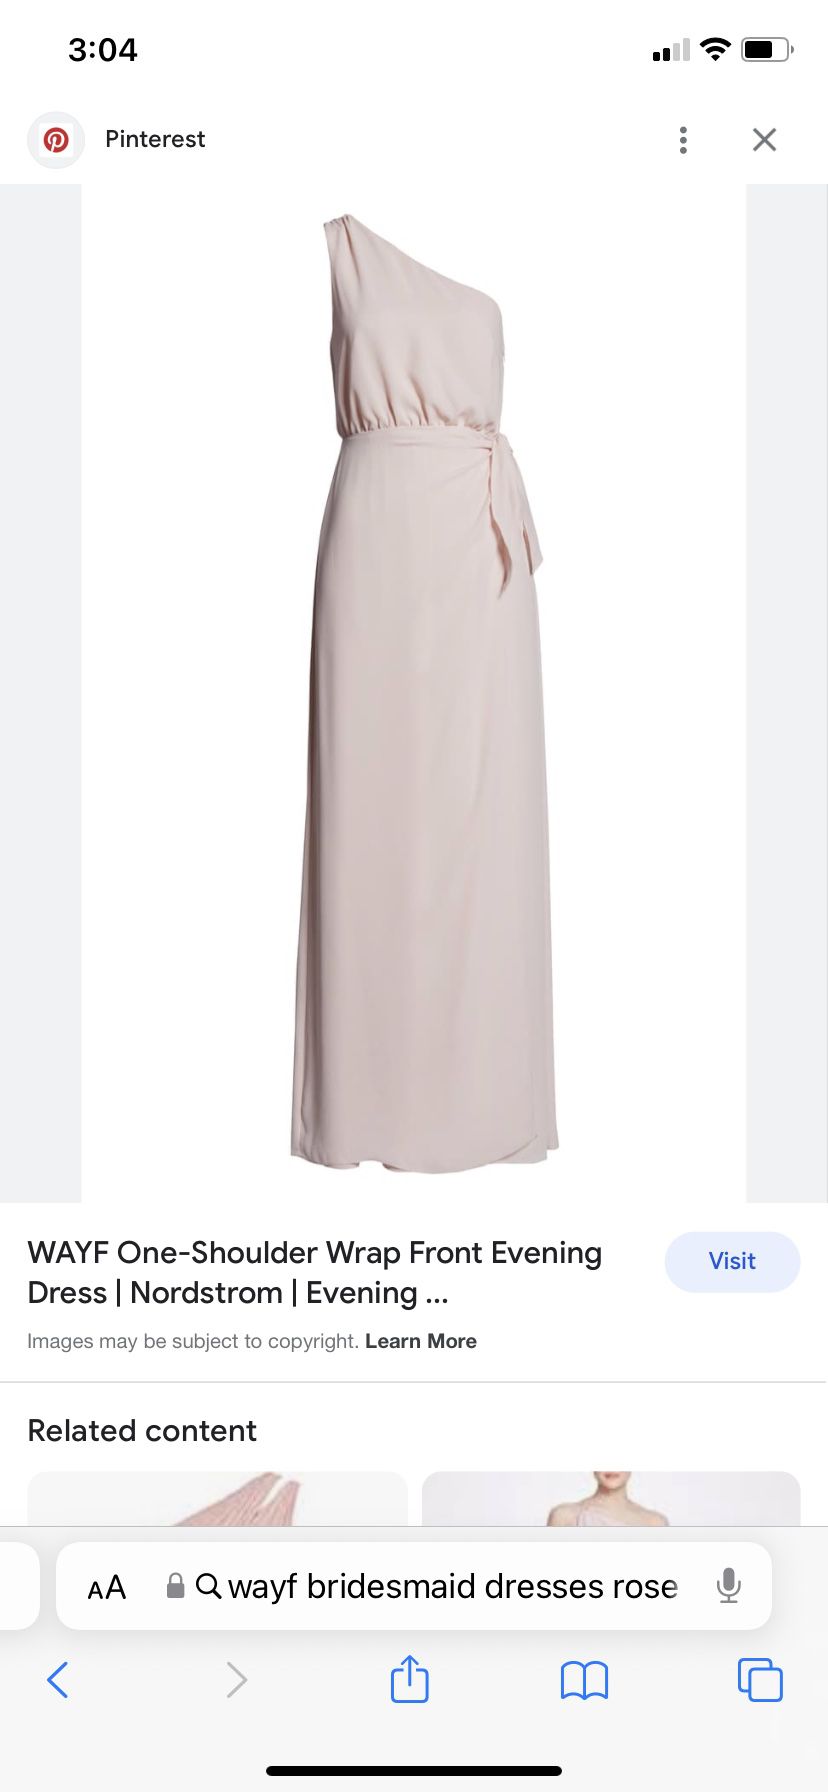 WAYF Bridesmaid Dress Rose Blush Size 6, Bought From Nordstrom! 